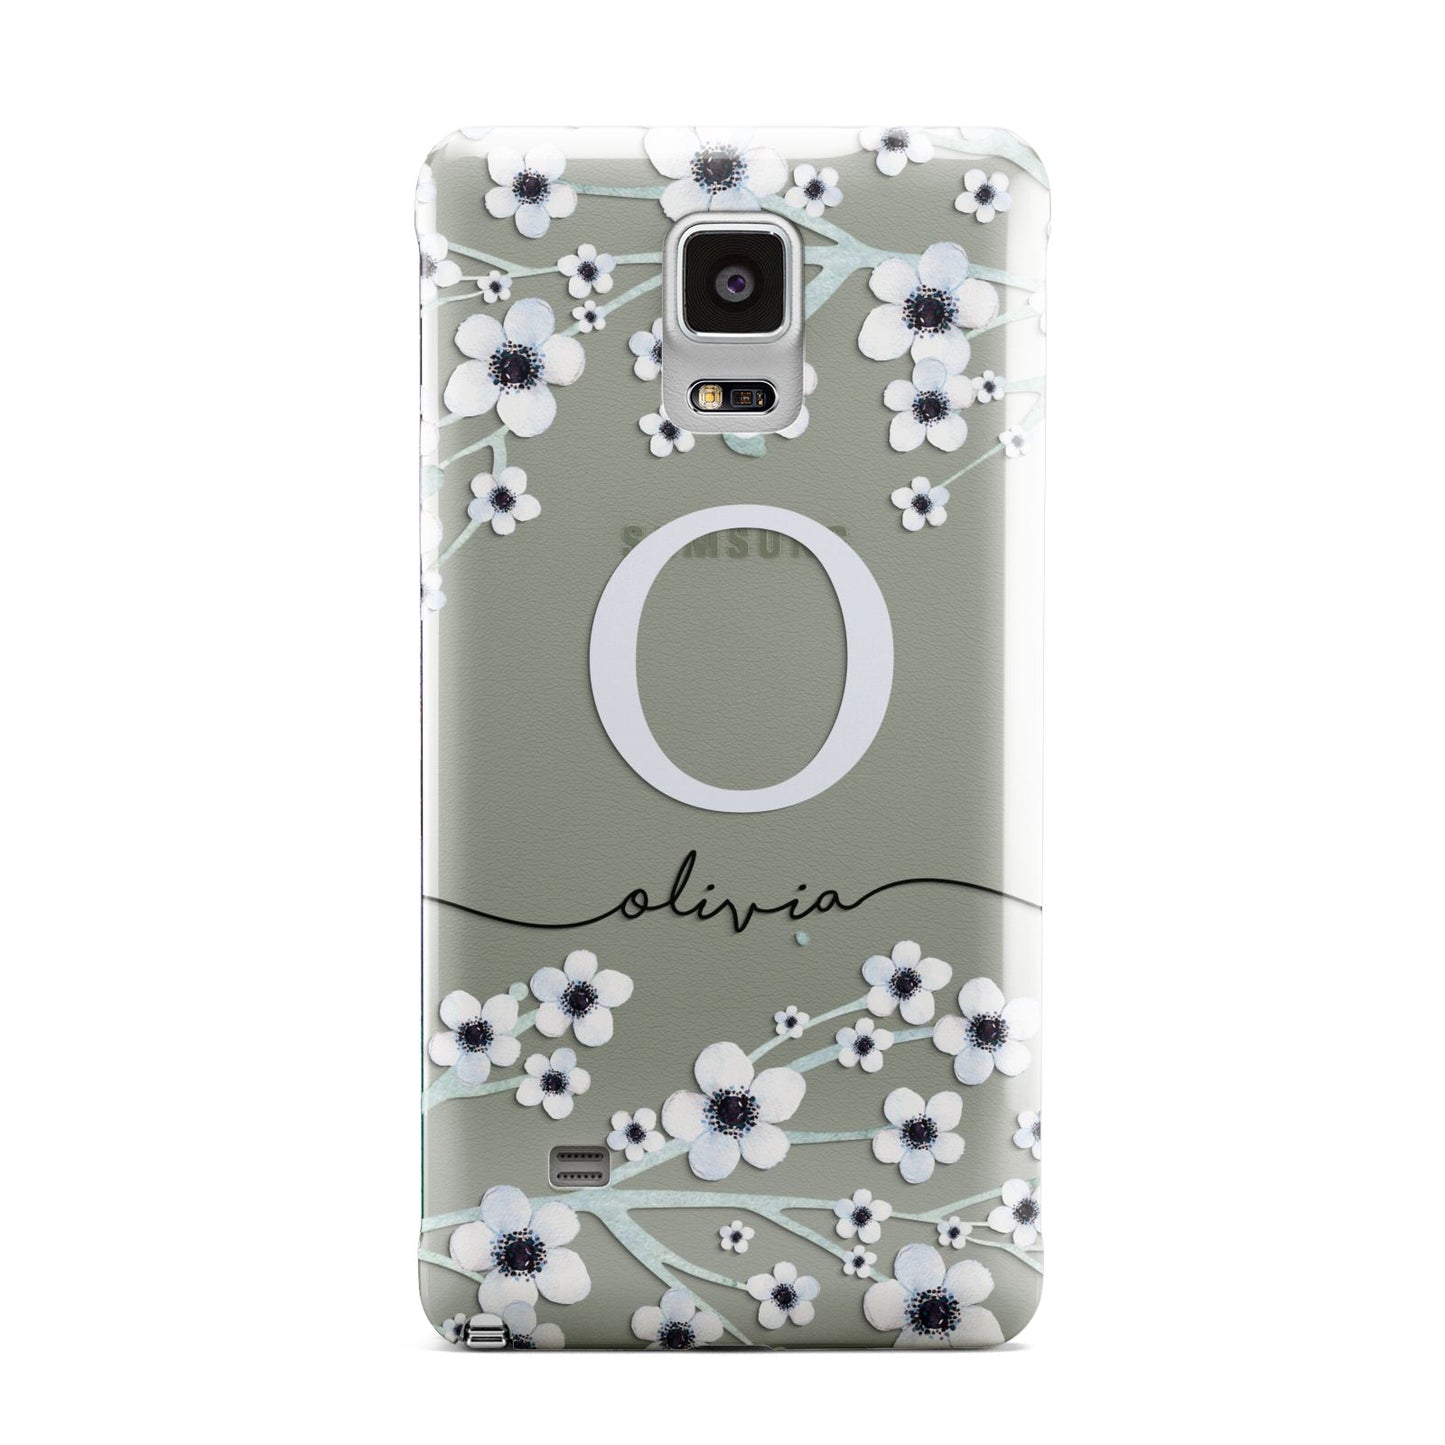 Personalised White Flower Samsung Galaxy Note 4 Case